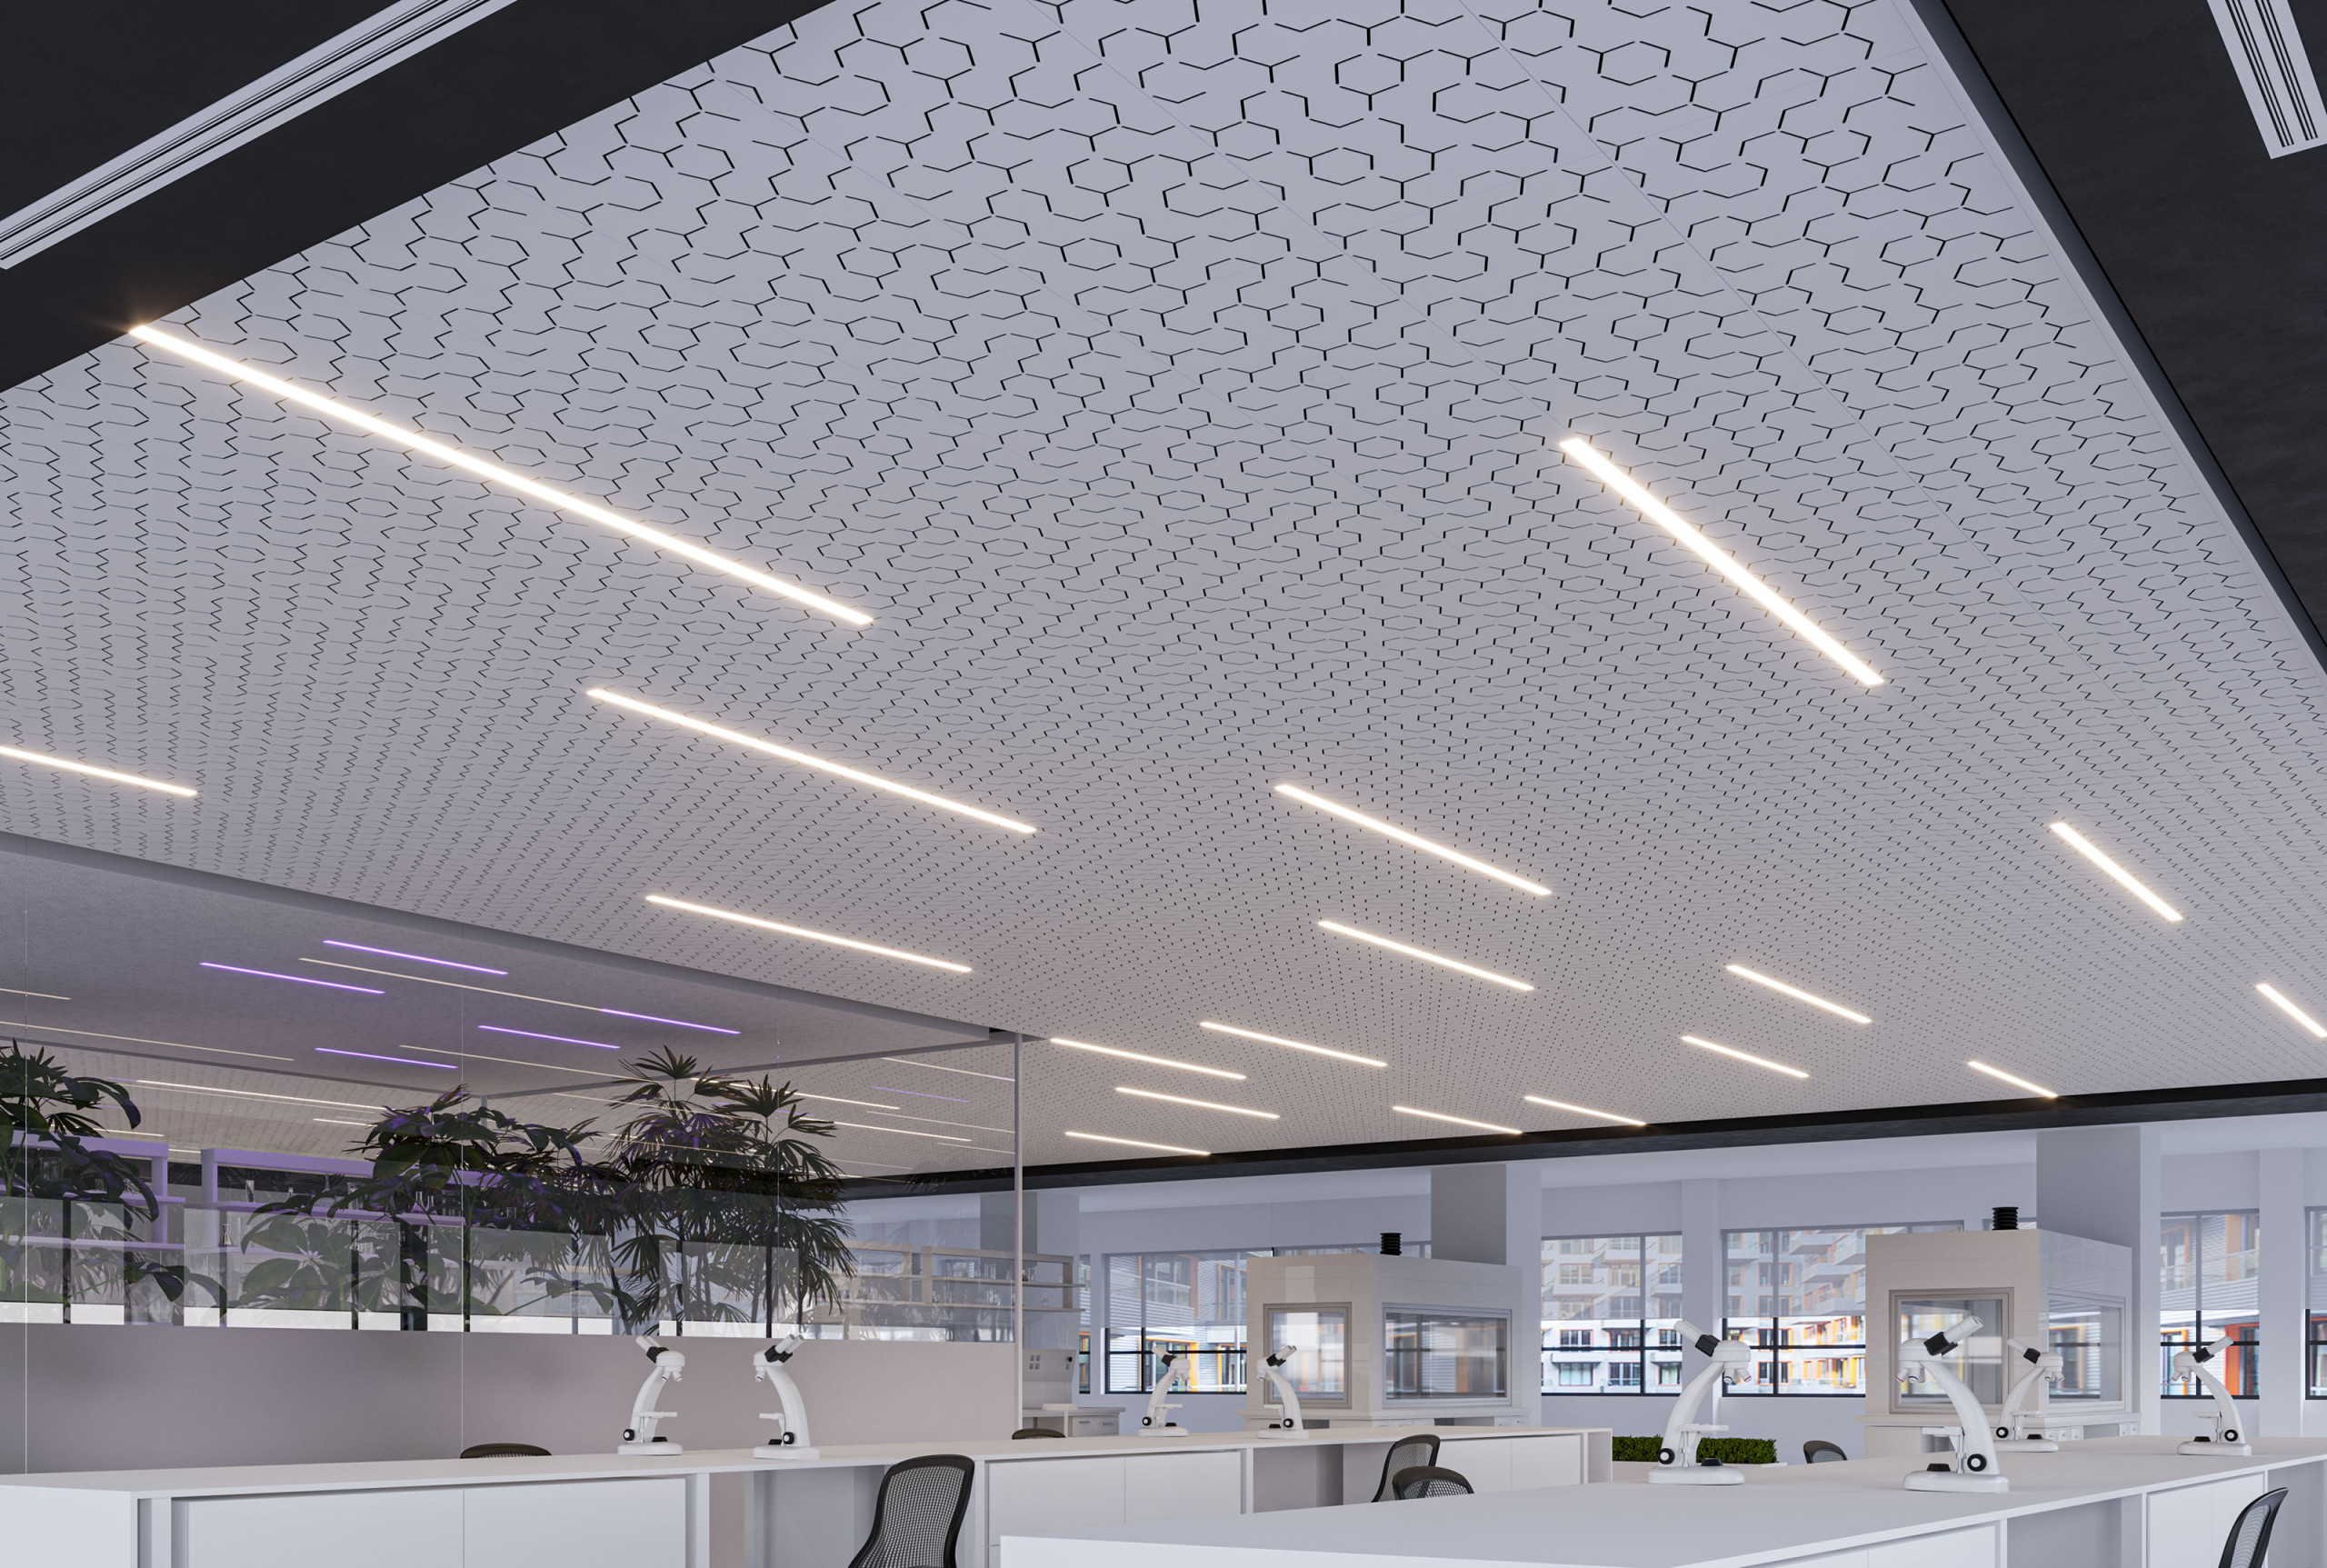 Fremme patois renovere Acoustic Lighting: 5 Ceiling Panel Styles and Options